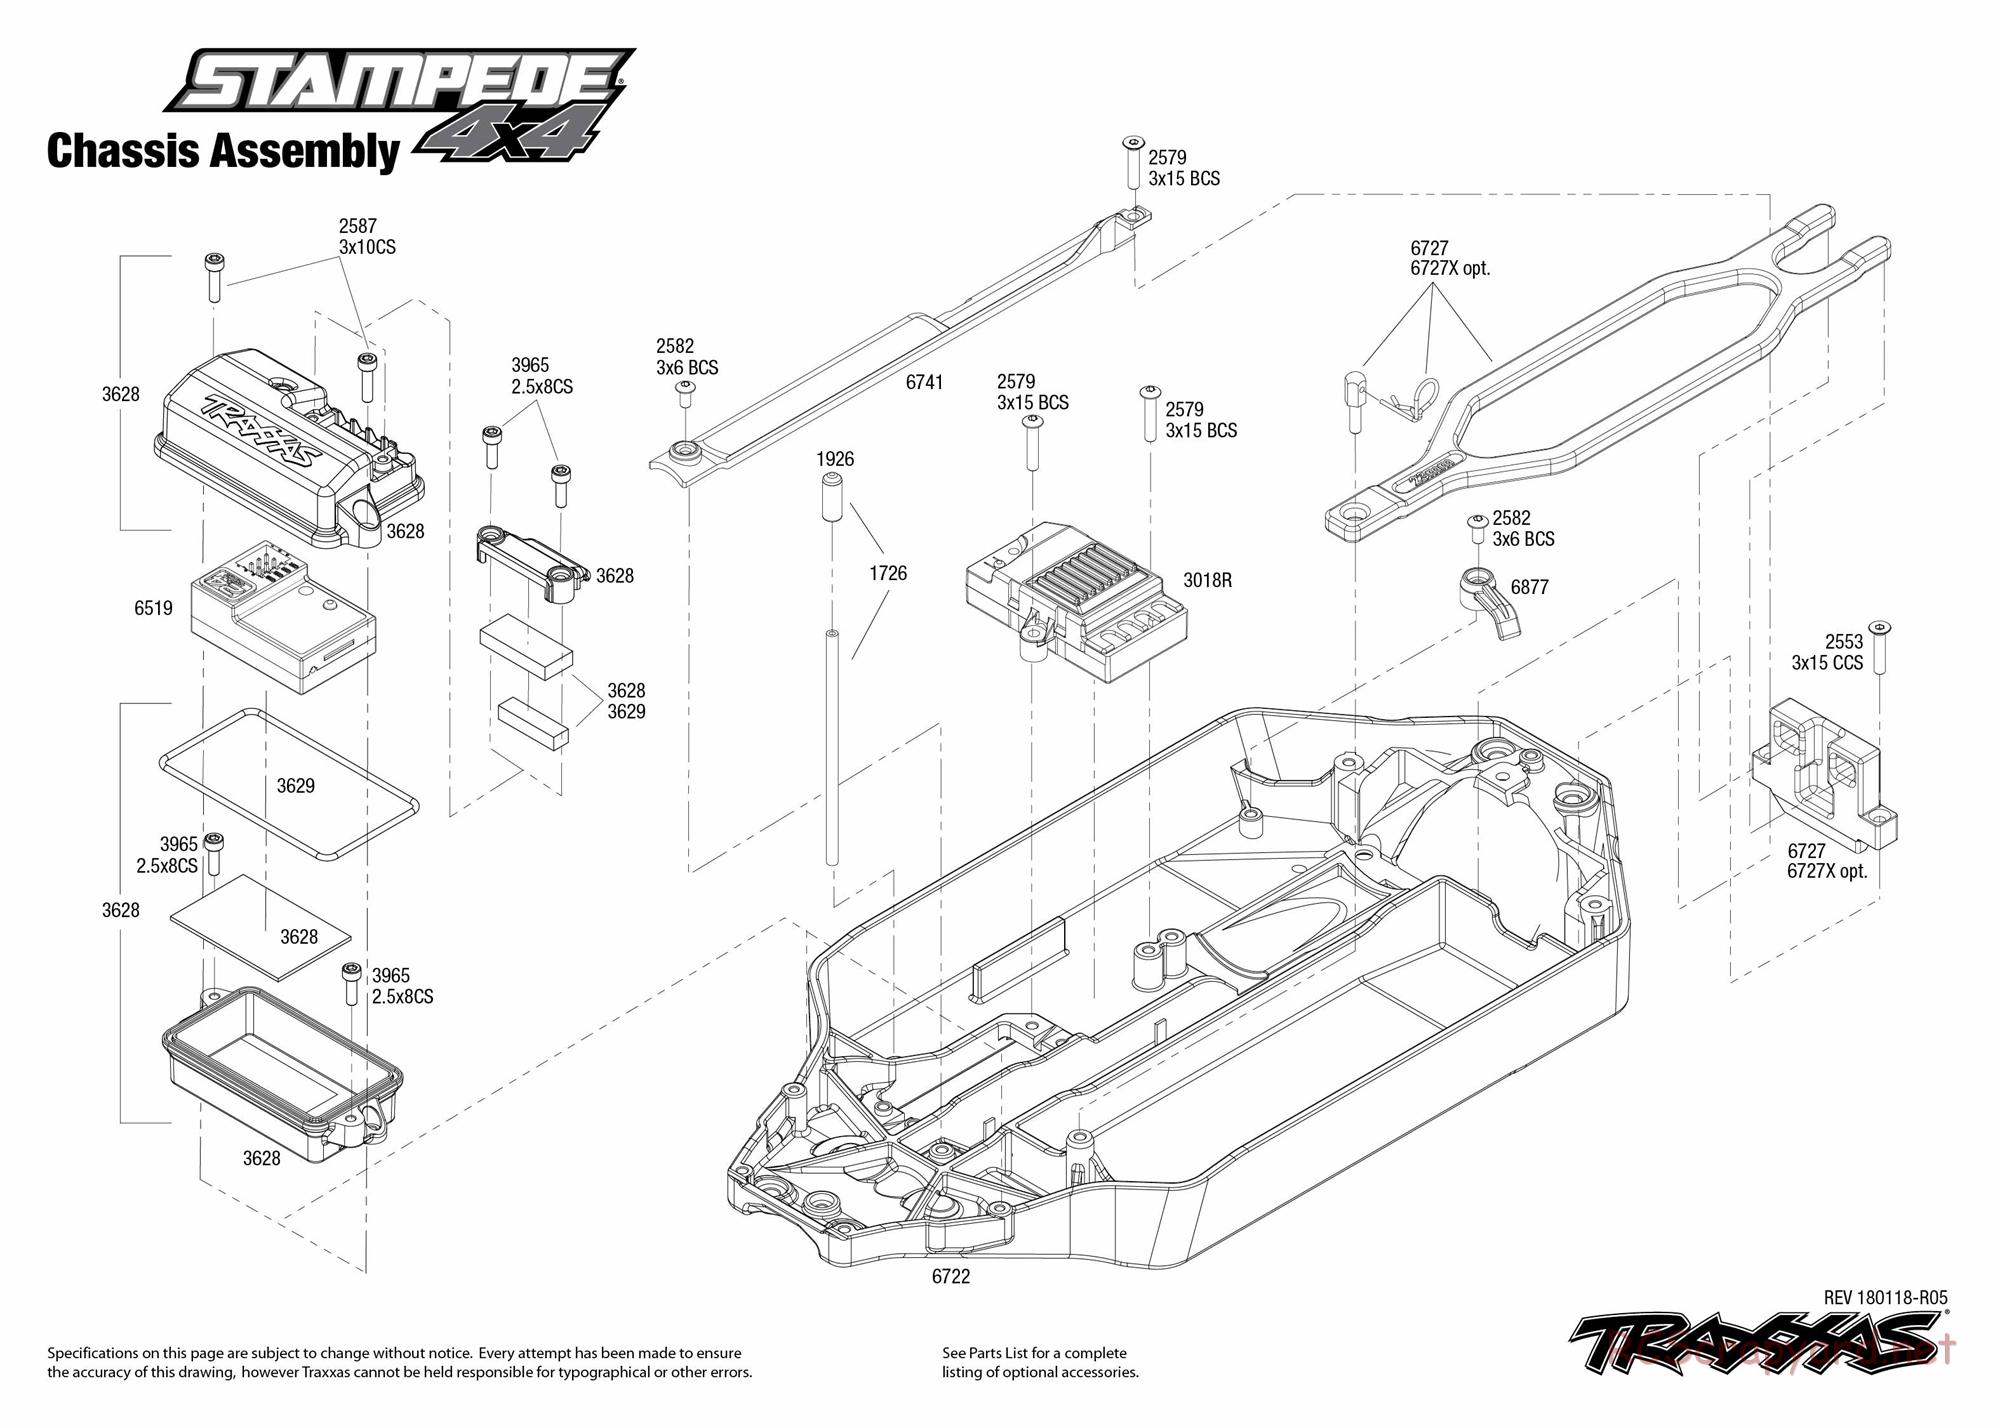 Traxxas - Stampede 4x4 (2013) - Exploded Views - Page 4